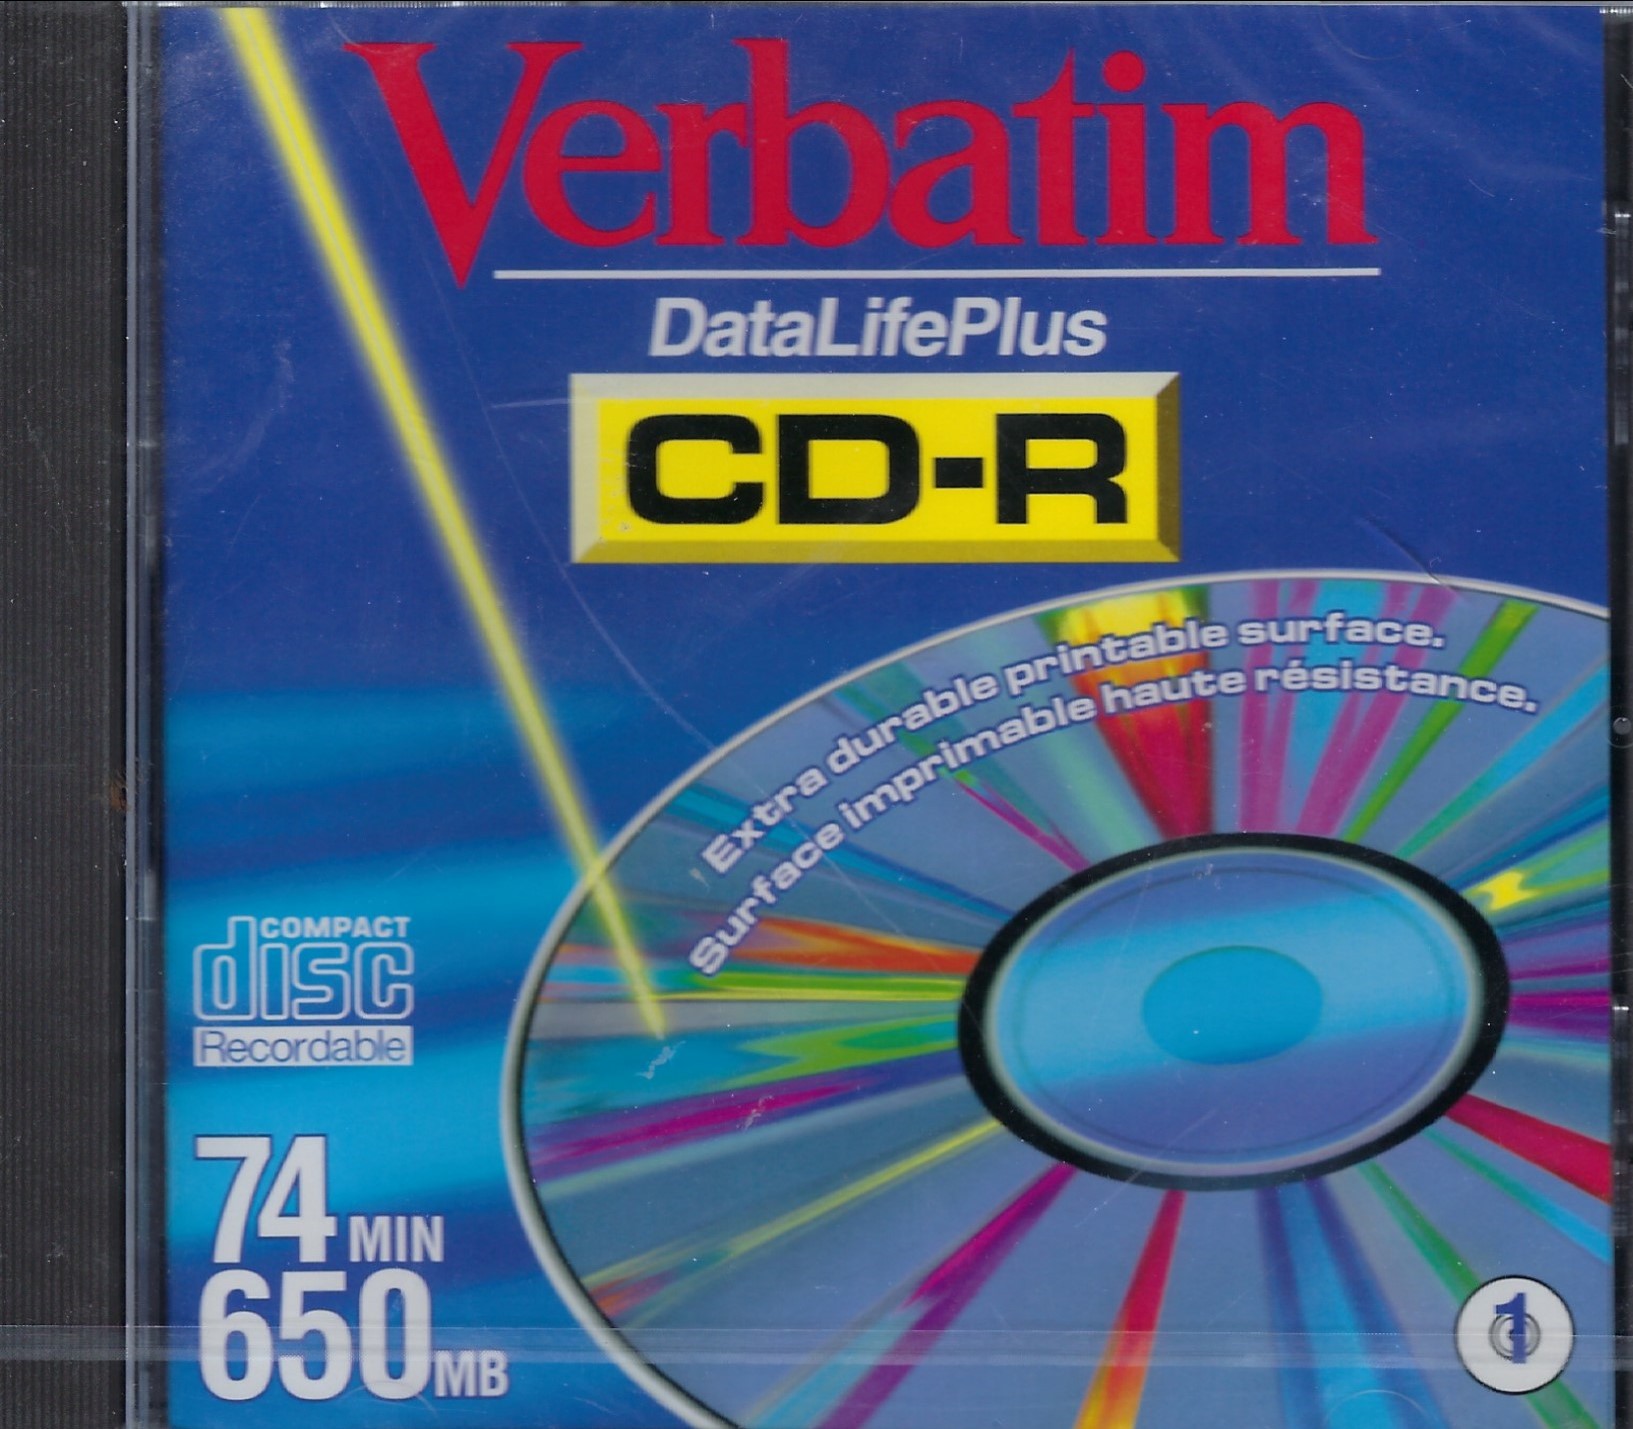 Verbatim CDR 650MB 74MIN Media 16x 1-Pack with Jewel Case Brand New - image 1 of 1